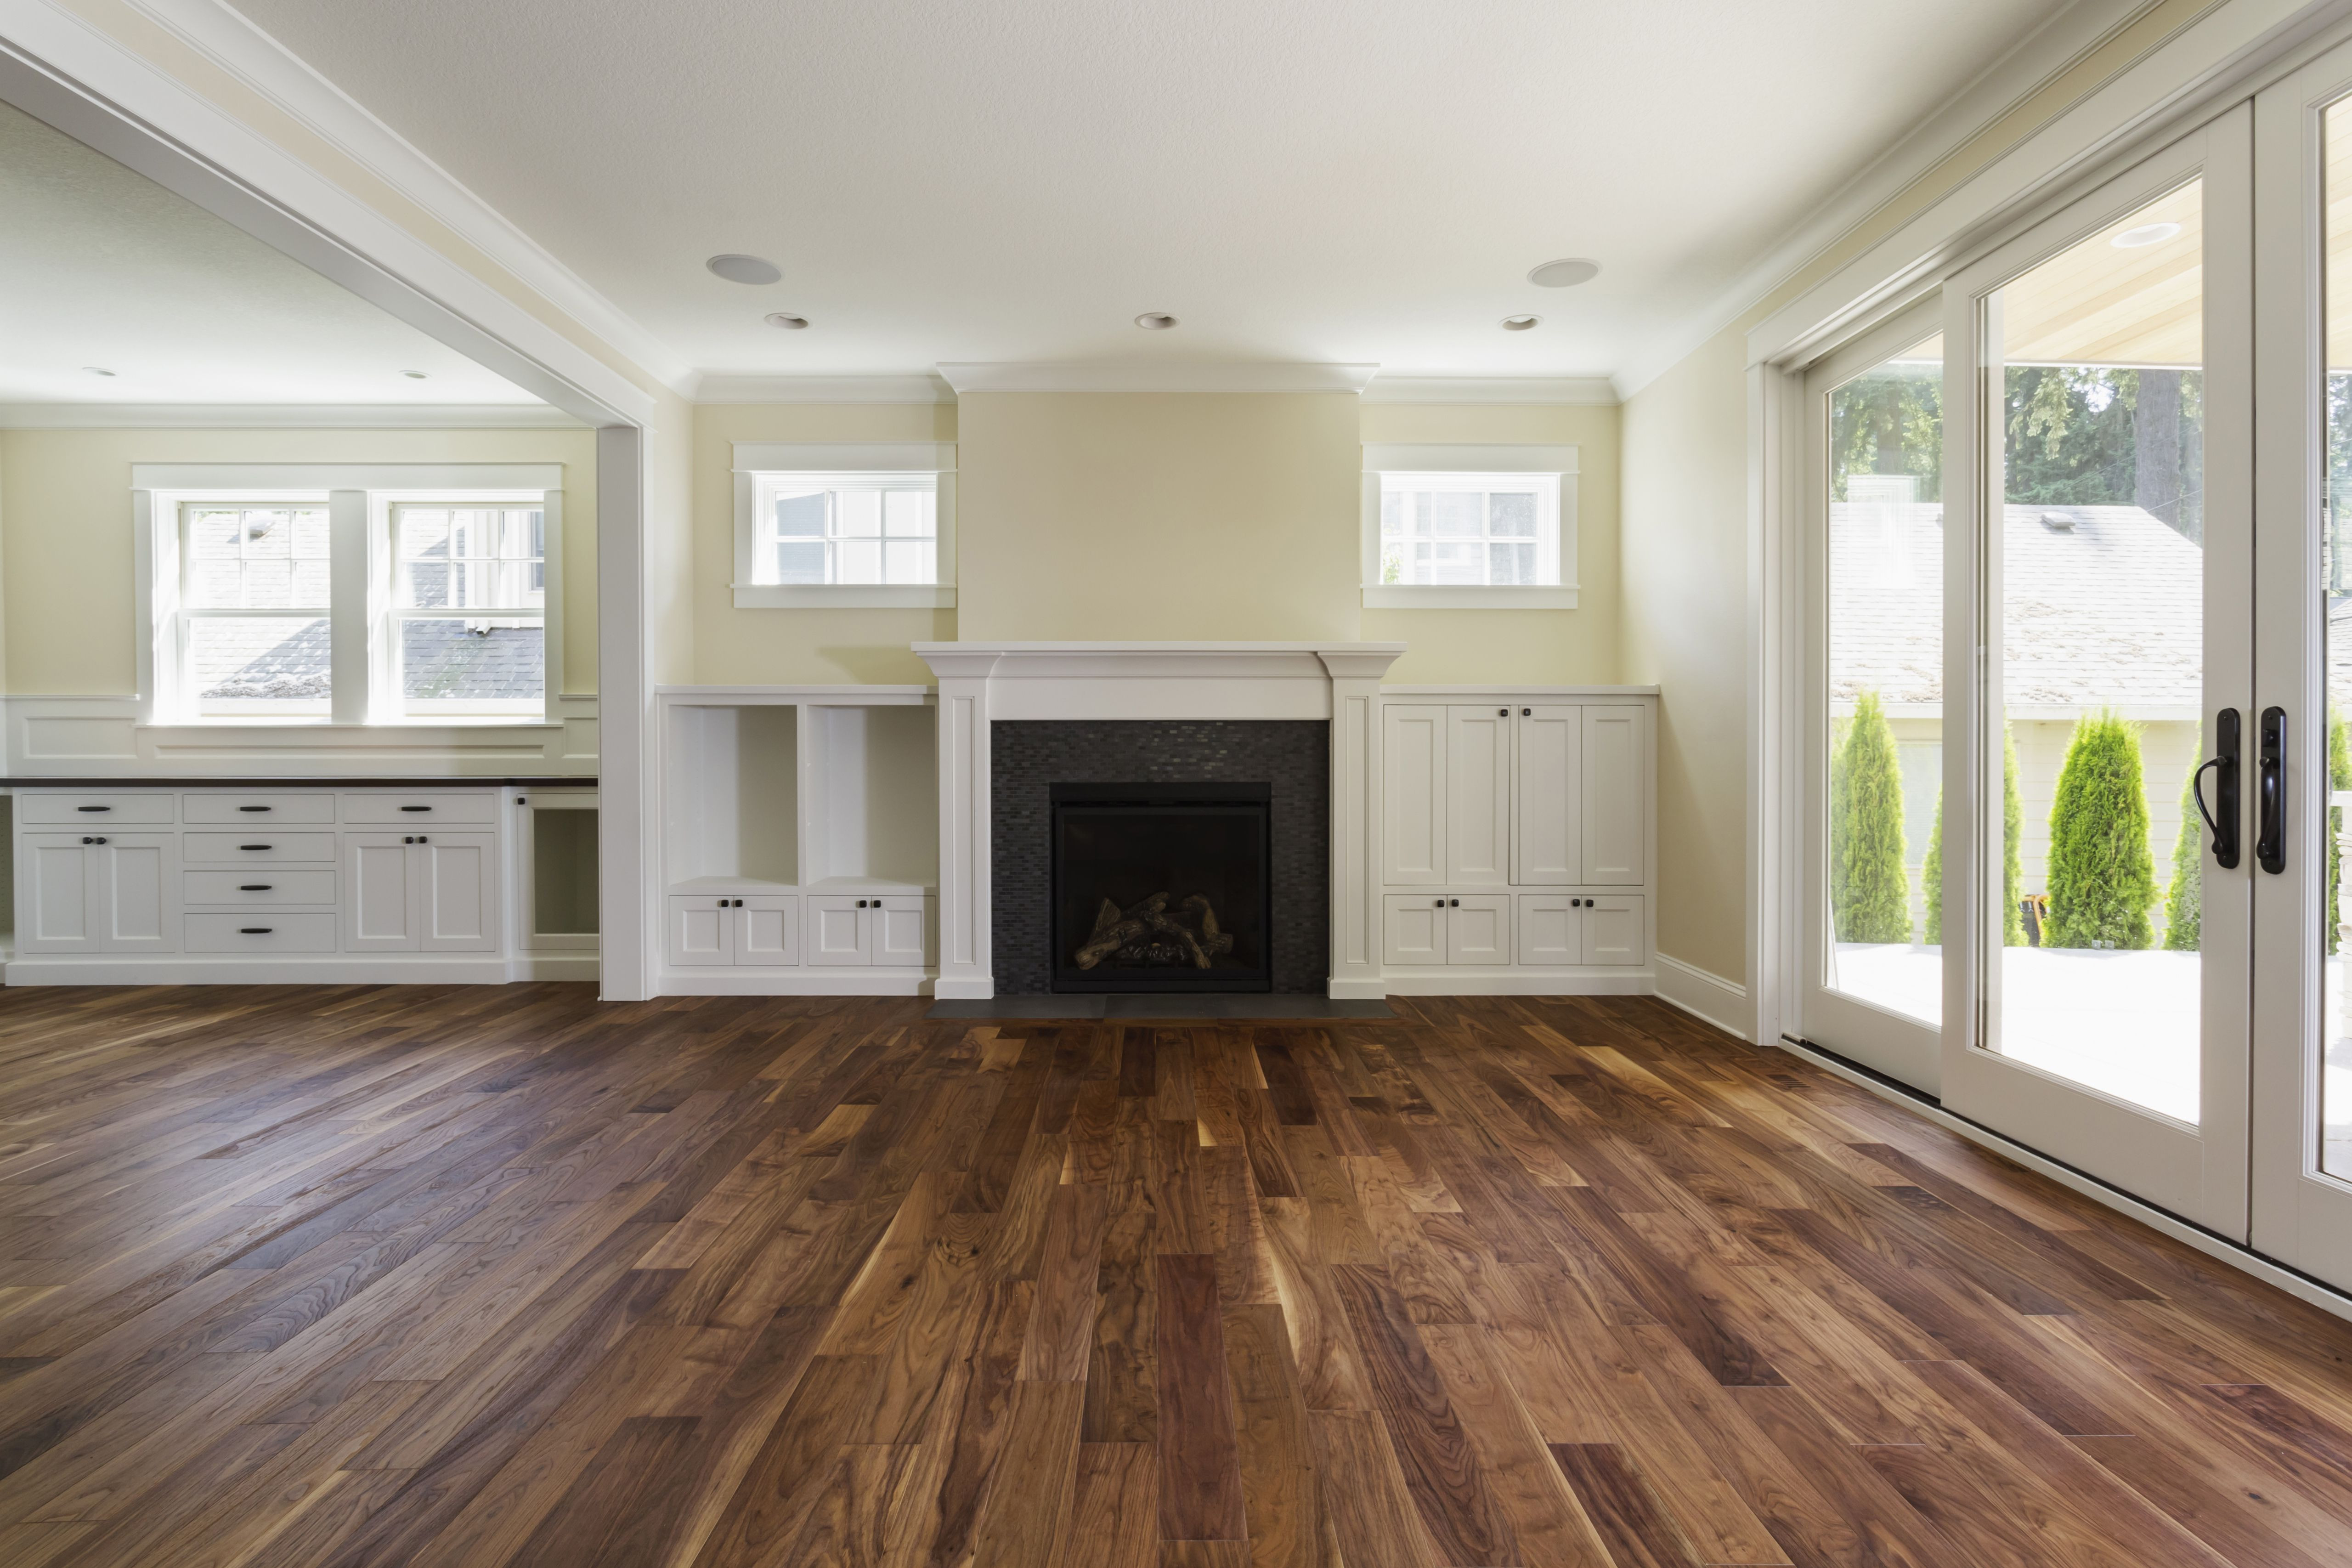 14 Lovable Hardwood Floor Finish Problems 2024 free download hardwood floor finish problems of the pros and cons of prefinished hardwood flooring pertaining to fireplace and built in shelves in living room 482143011 57bef8e33df78cc16e035397